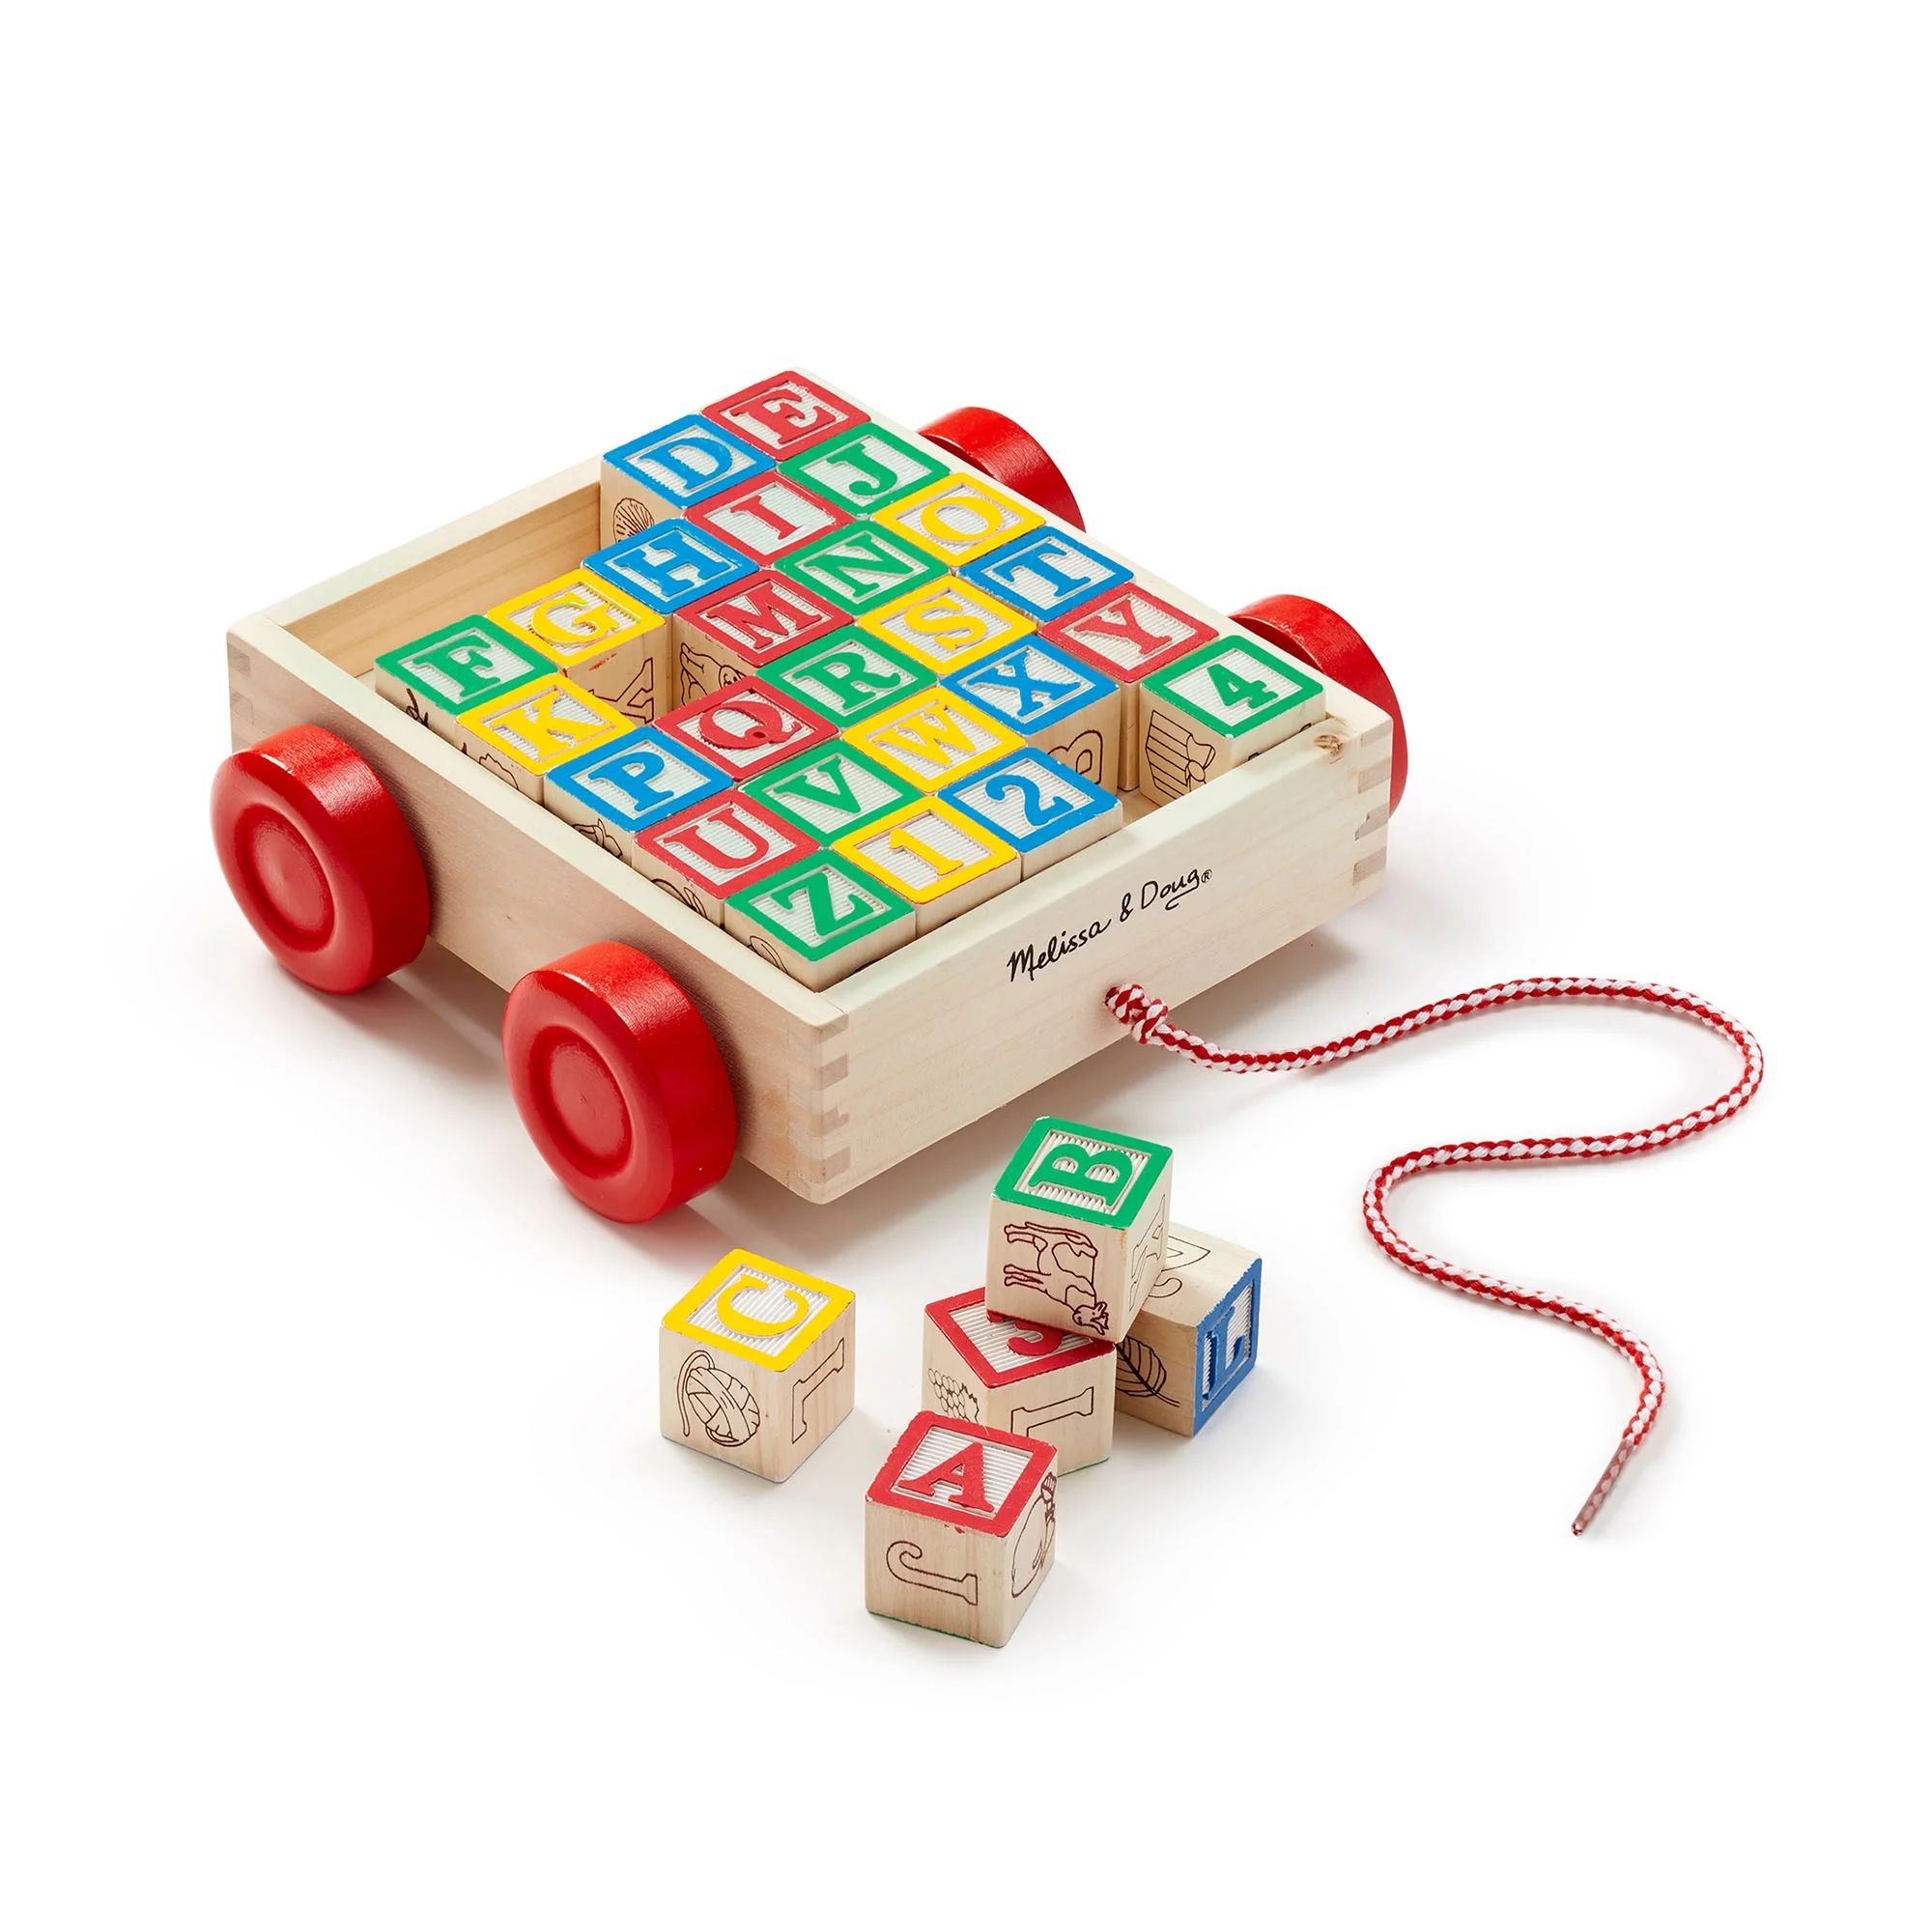 Melissa & Doug Classic ABC Wooden Block Cart Educational Toy With 30 1-Inch Solid Wood Blocks | Walmart (US)